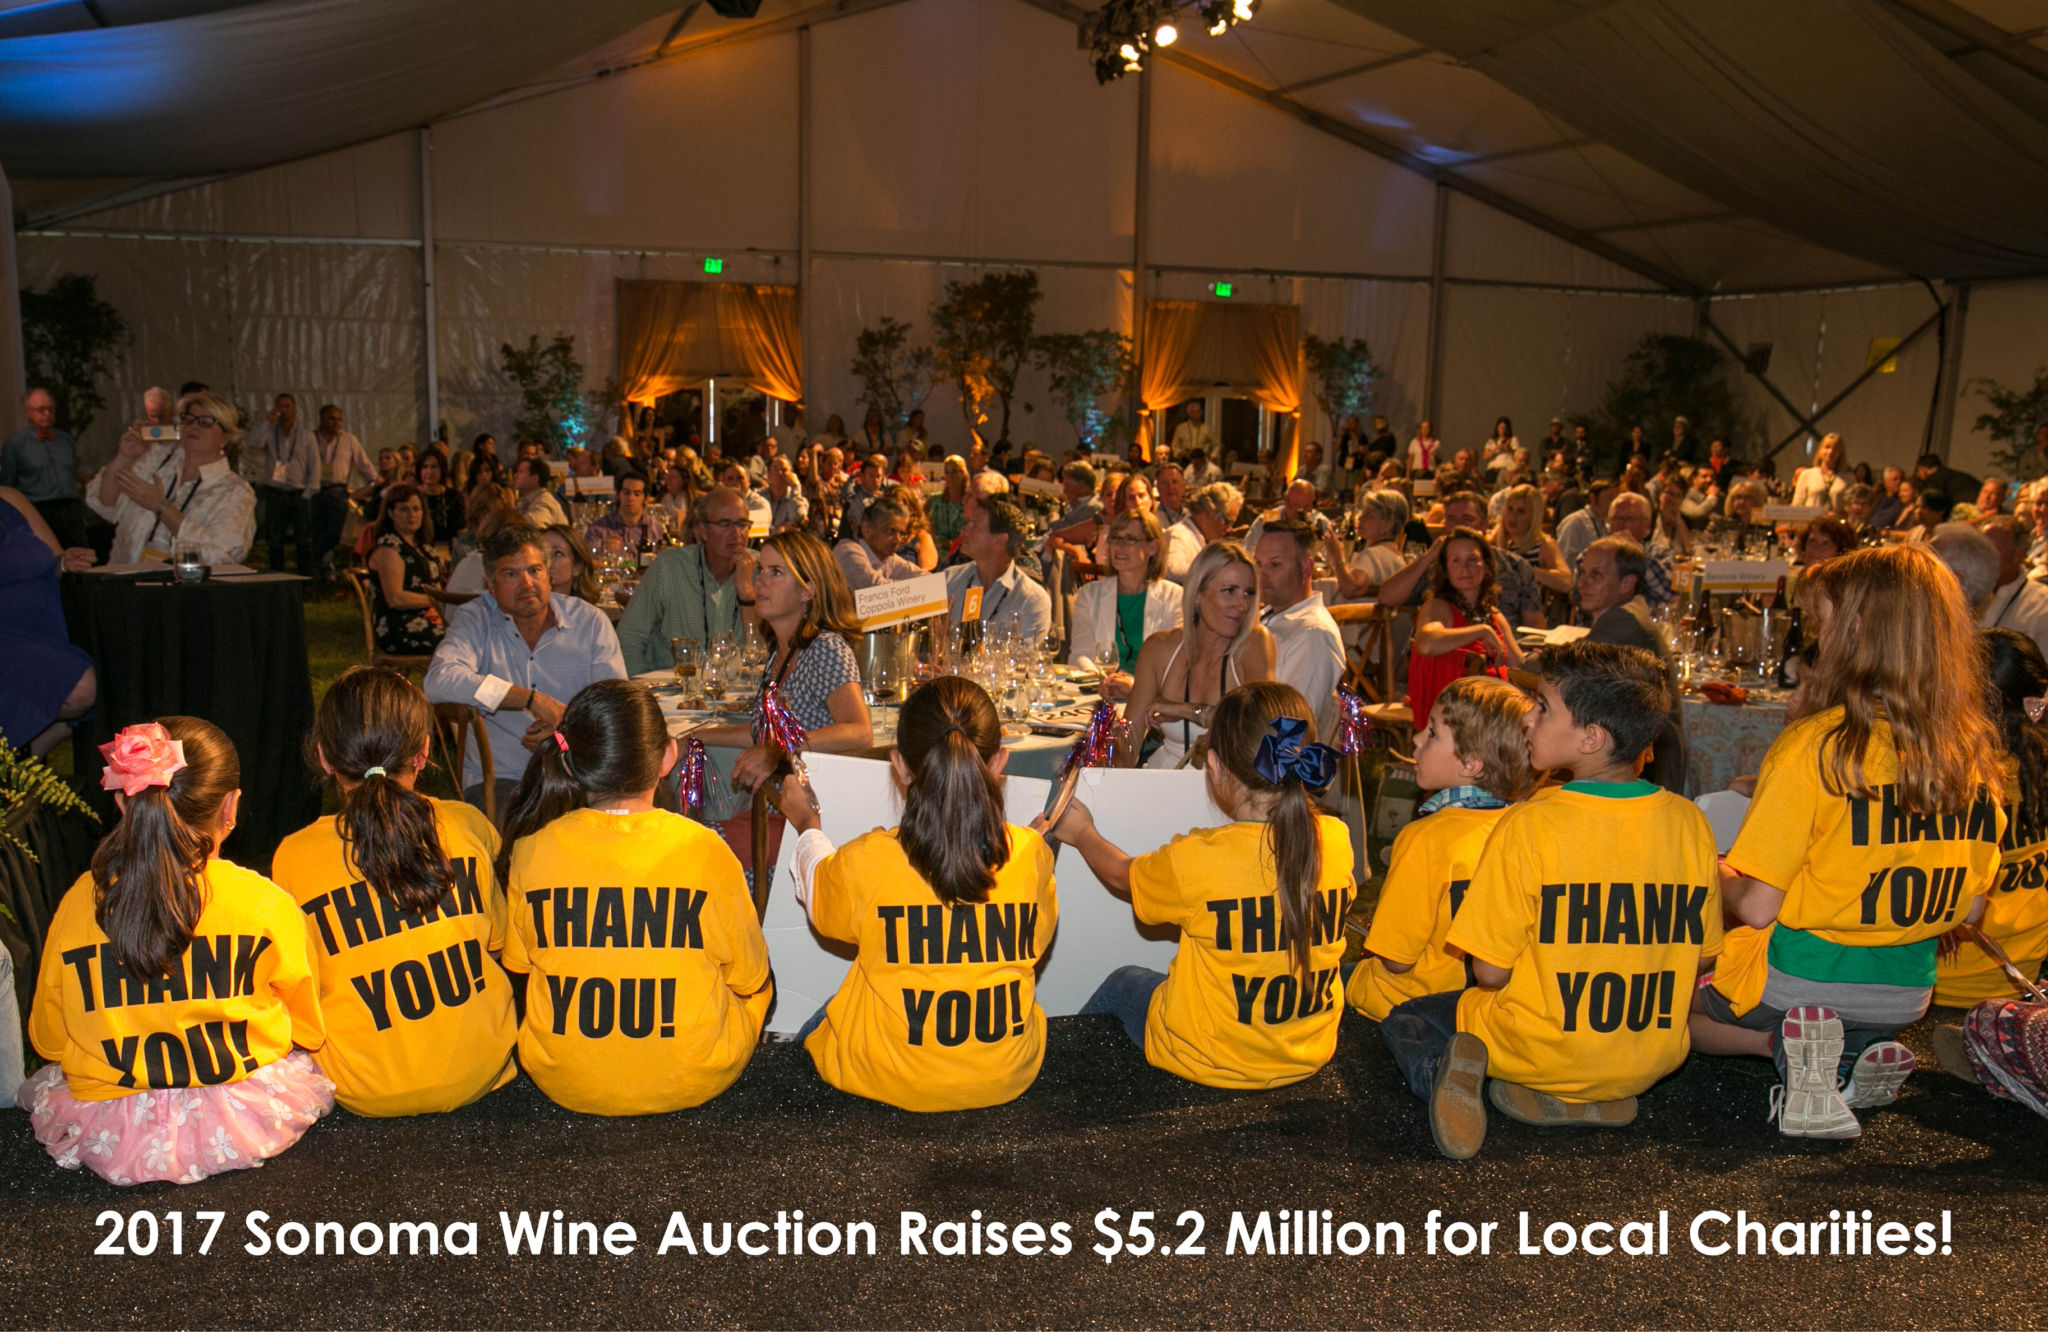 Sonoma Wine Country Weekend Raises $5.2 Million for Local Charities